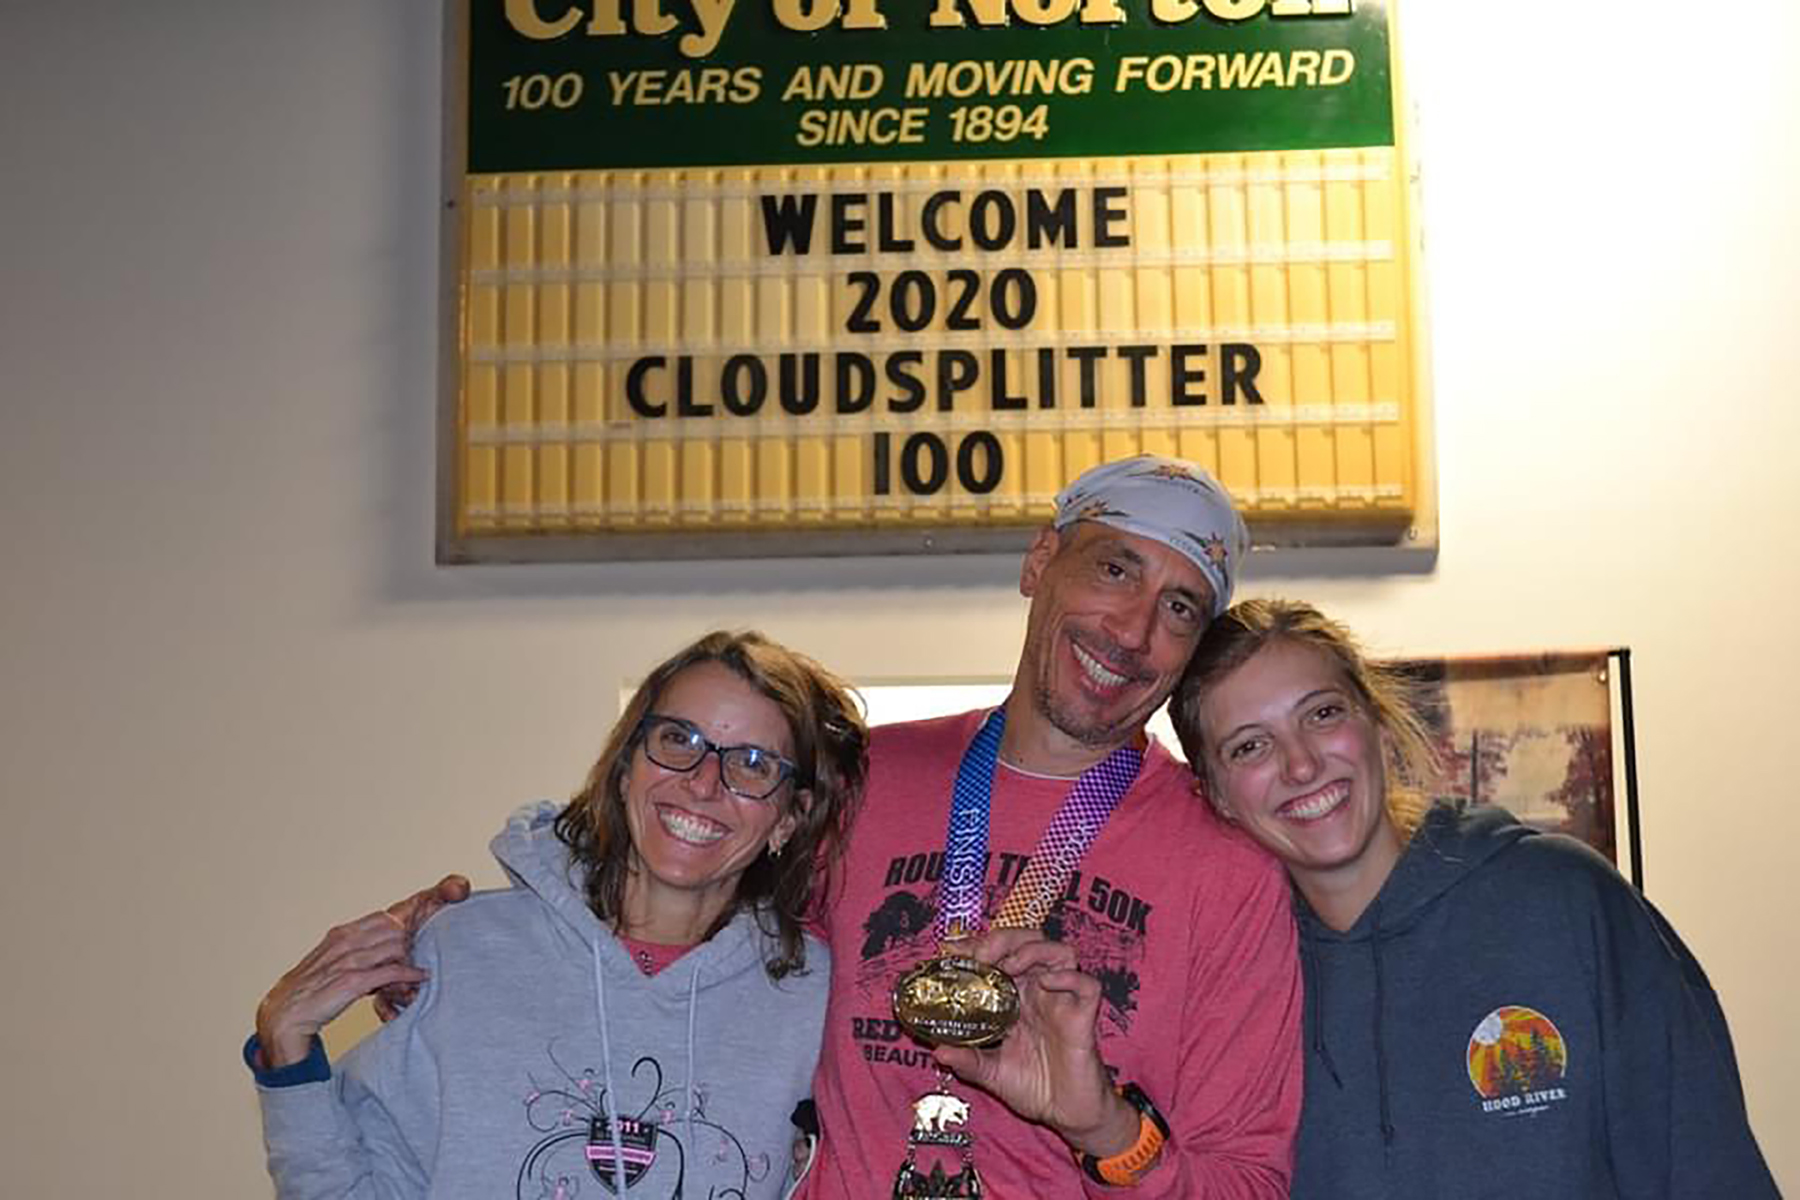 Randy Kreill drives the 2020 completed Cloudsplitter 100 to his "longest and toughest" Race. Crail ran the race in sandals, taking him over 37 hours through the rugged and remote mountains of Virginia. He stands with his wife Megan and his daughter Lindsay after the race.